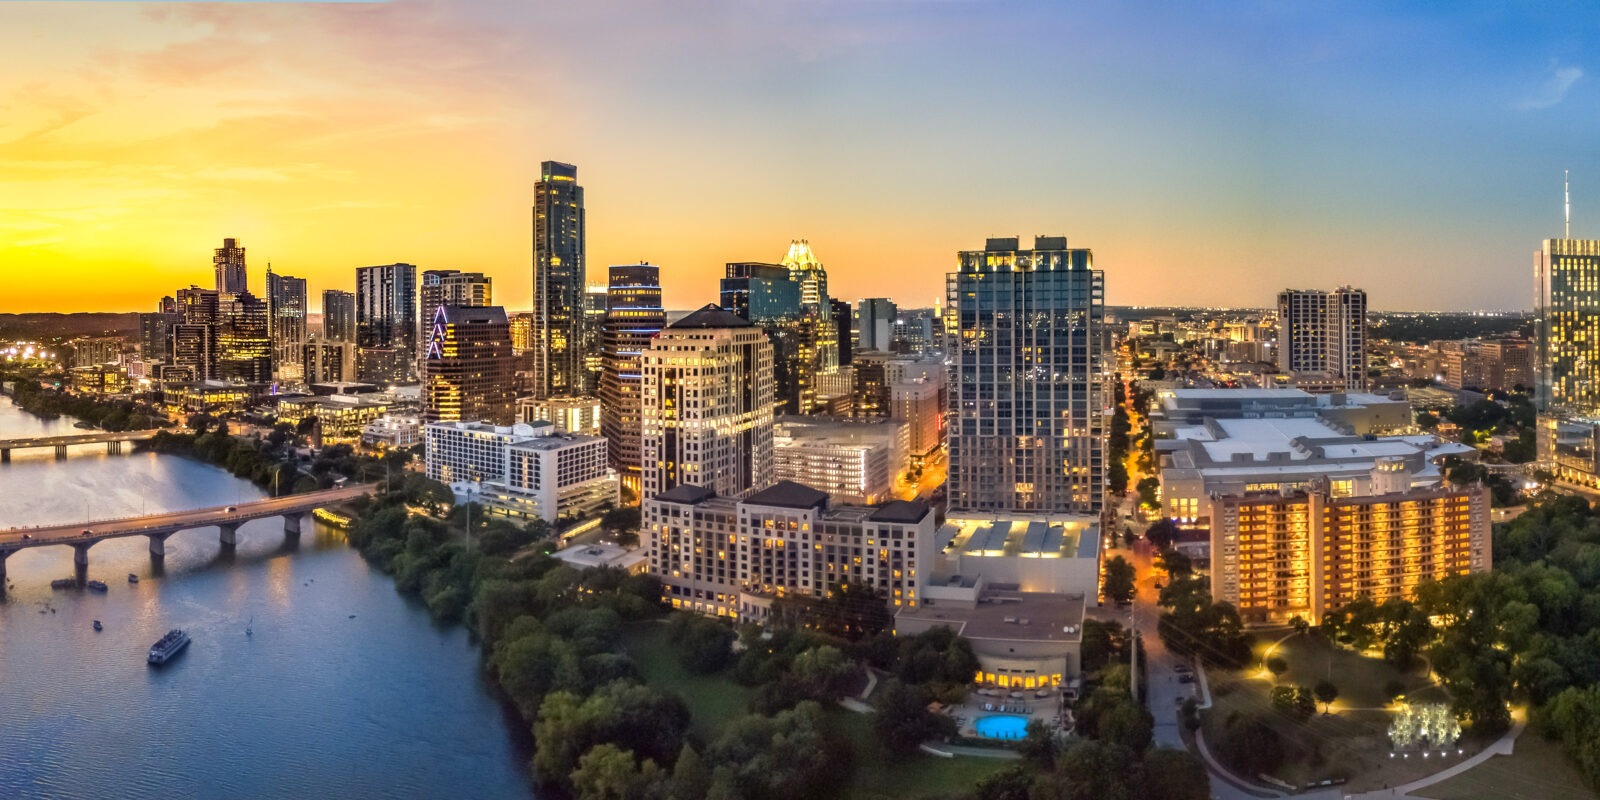 SAVE THE DATE: AILA Texas, Oklahoma, New Mexico Chapter Spring Conference – March 30, 2023 – April 2nd 2023 in Austin, Texas.